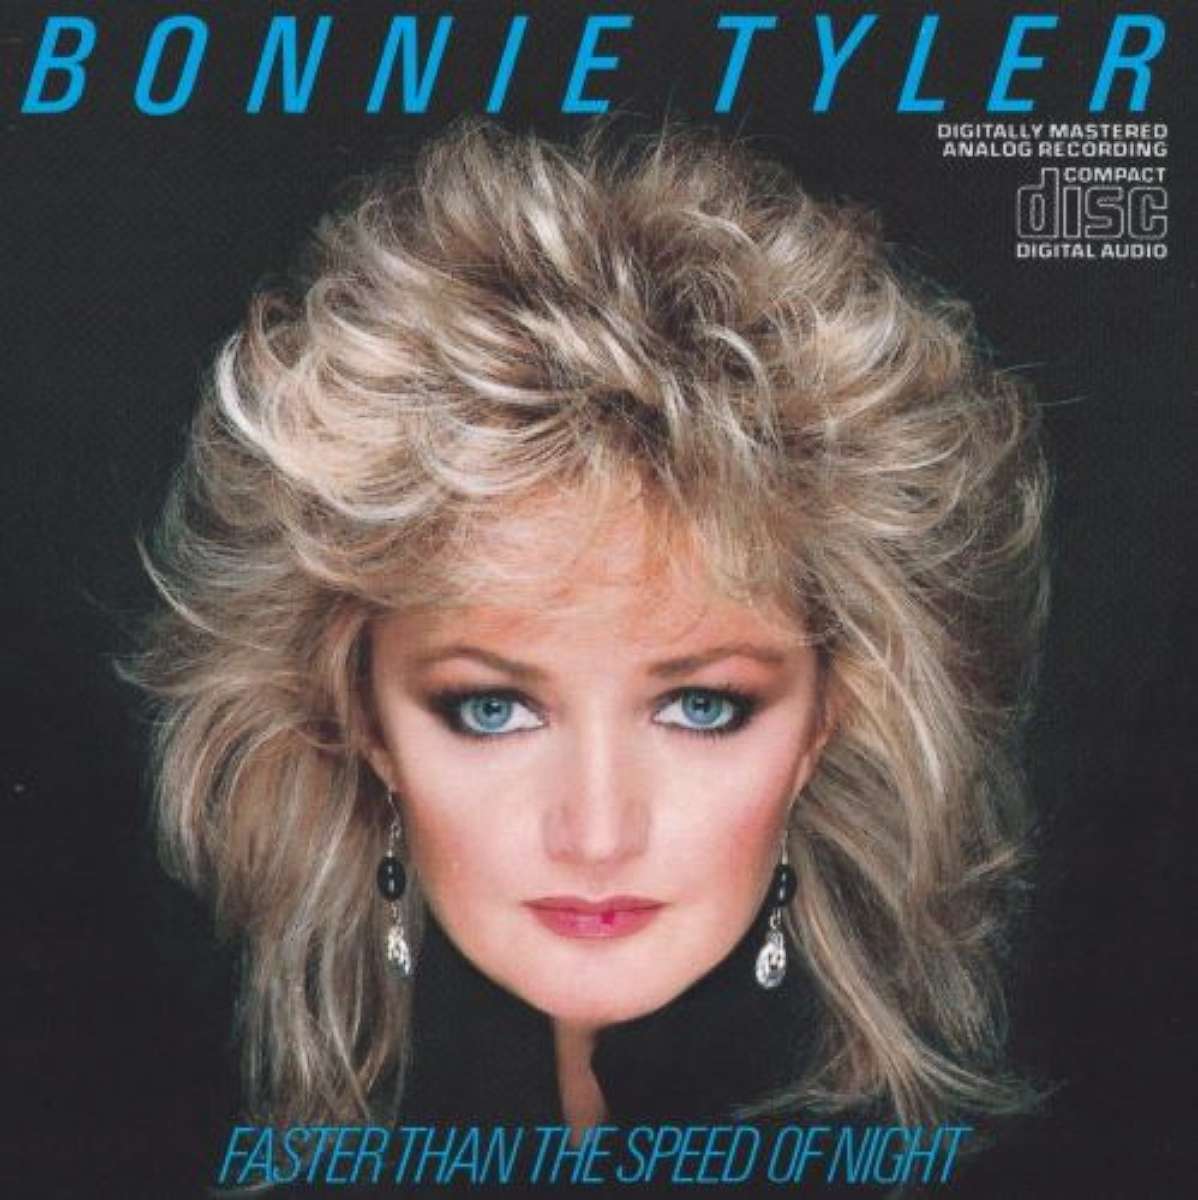 PHOTO: "Total Eclipse of the Heart" from artist Bonnie Tyler's 1982 album, "Faster Than the Speed of Night," surpassed the reggaeton-pop hit "Despacito" by Luis Fonsi and is priced at $1.29 in the iTunes app. 